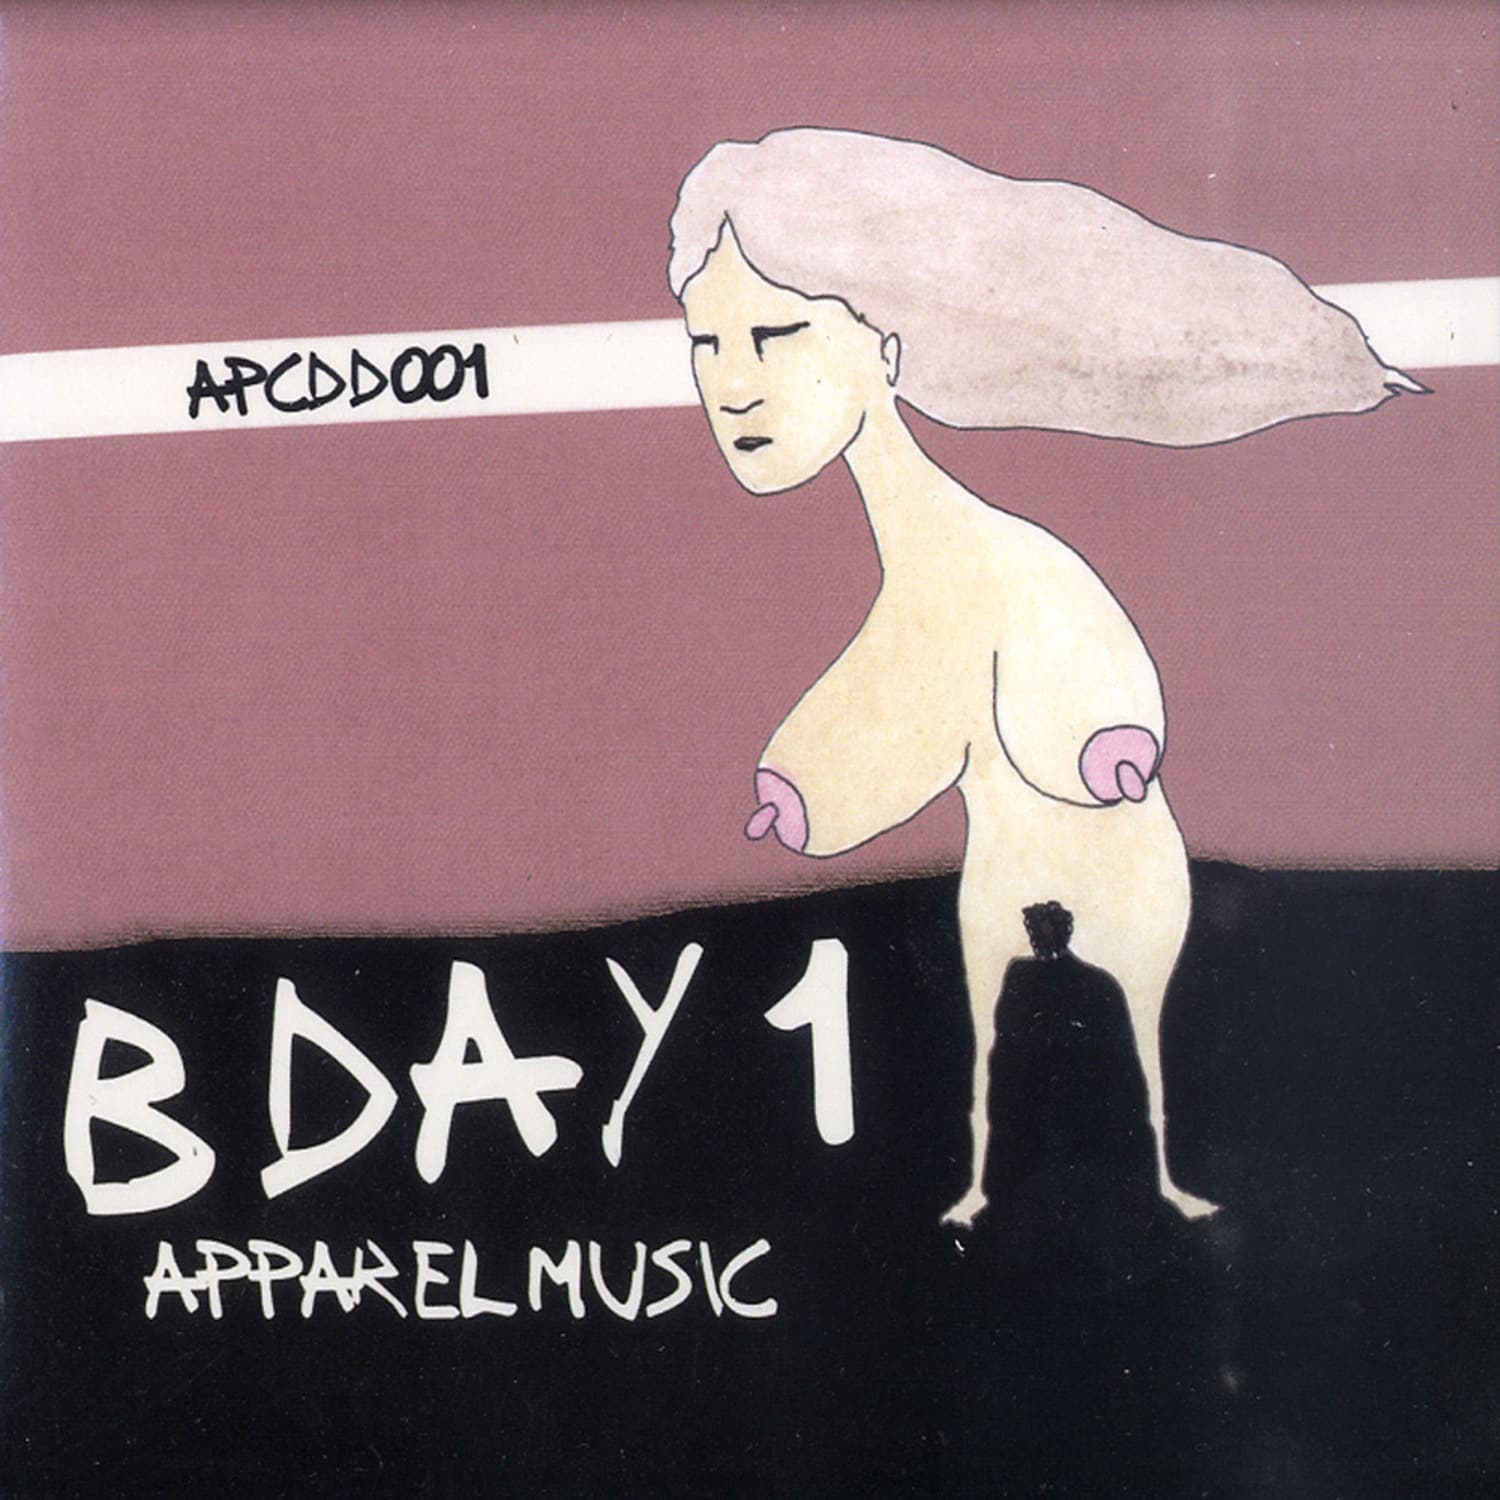 Various Artists - B DAY 1 